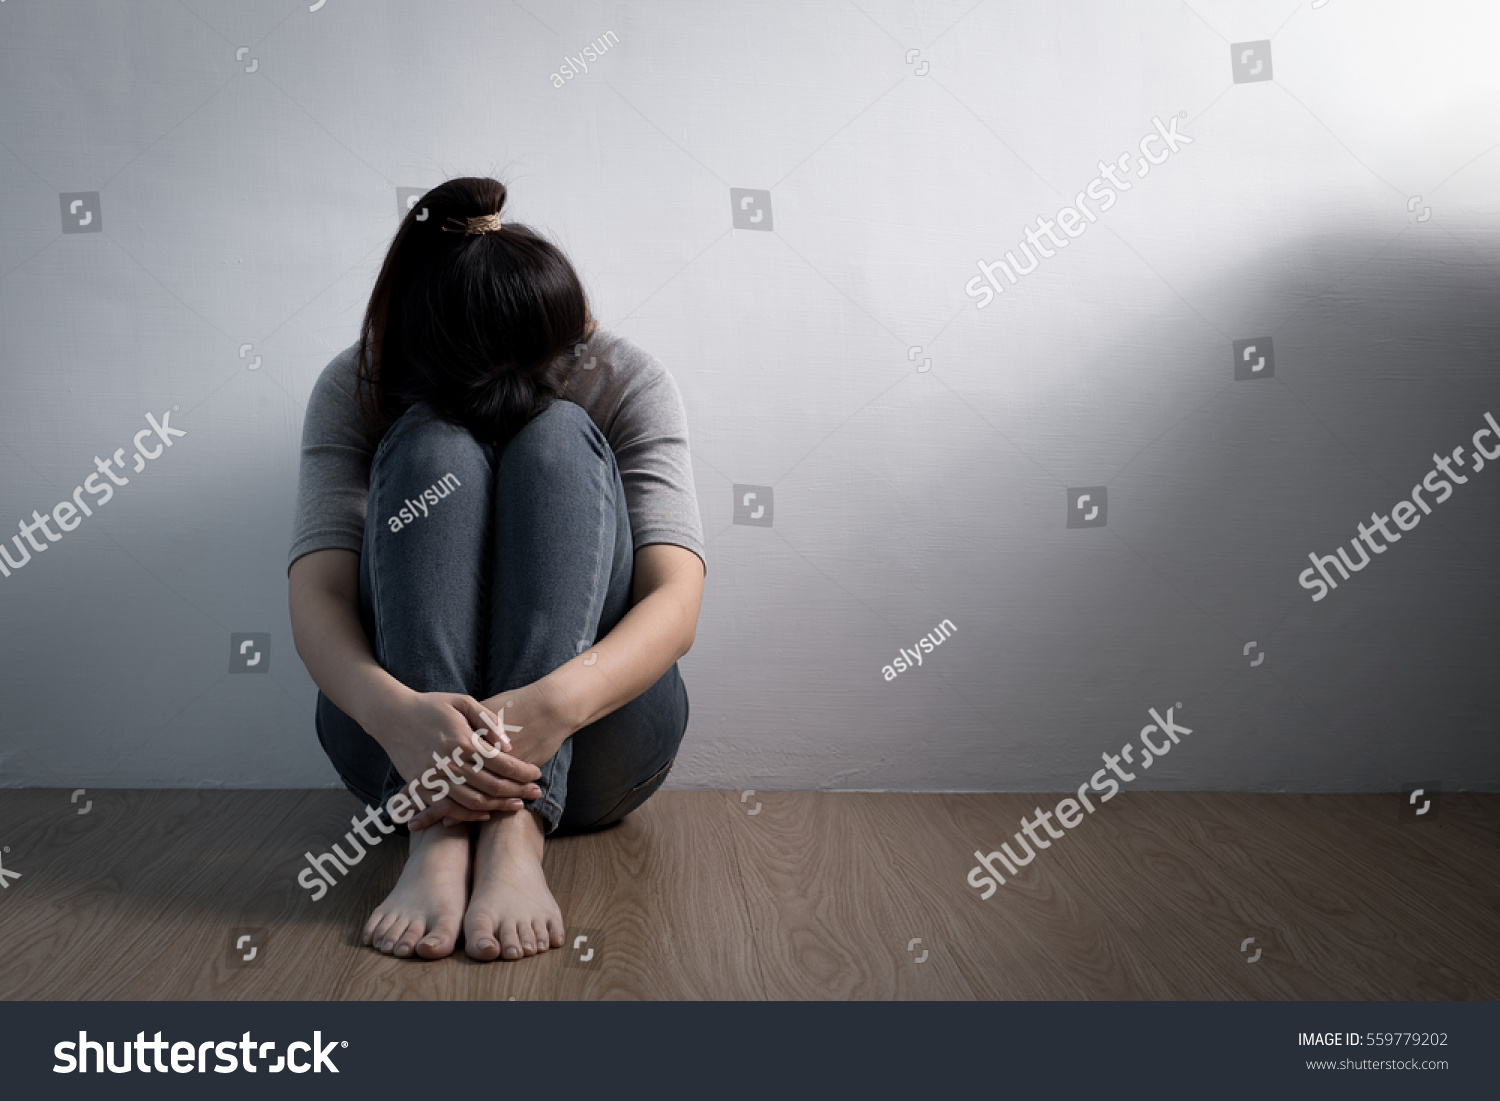 The depression woman sit on the floor #559779202